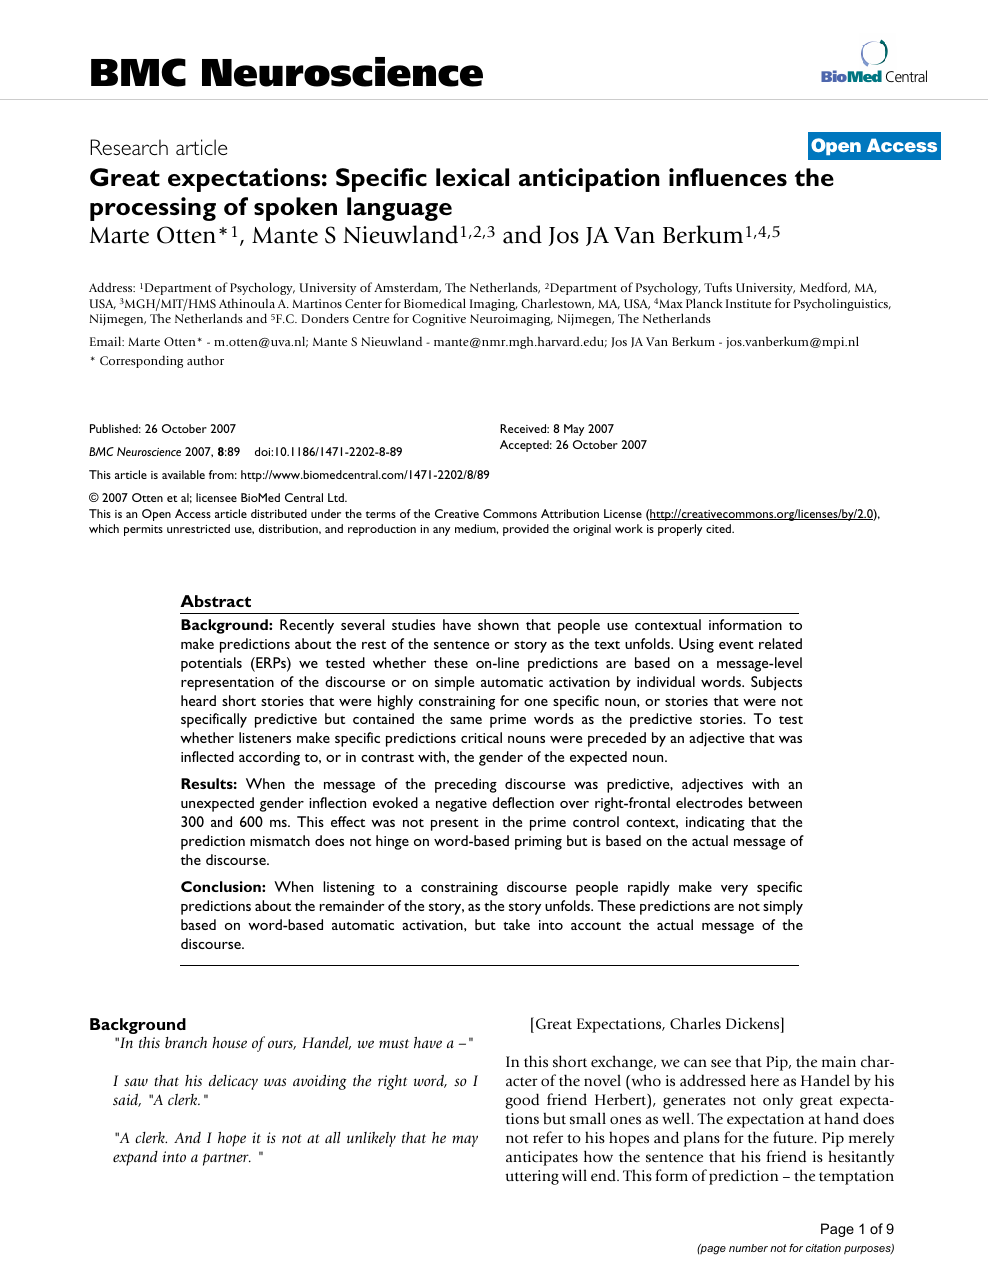 Great Expectations Specific Lexical Anticipation Influences The